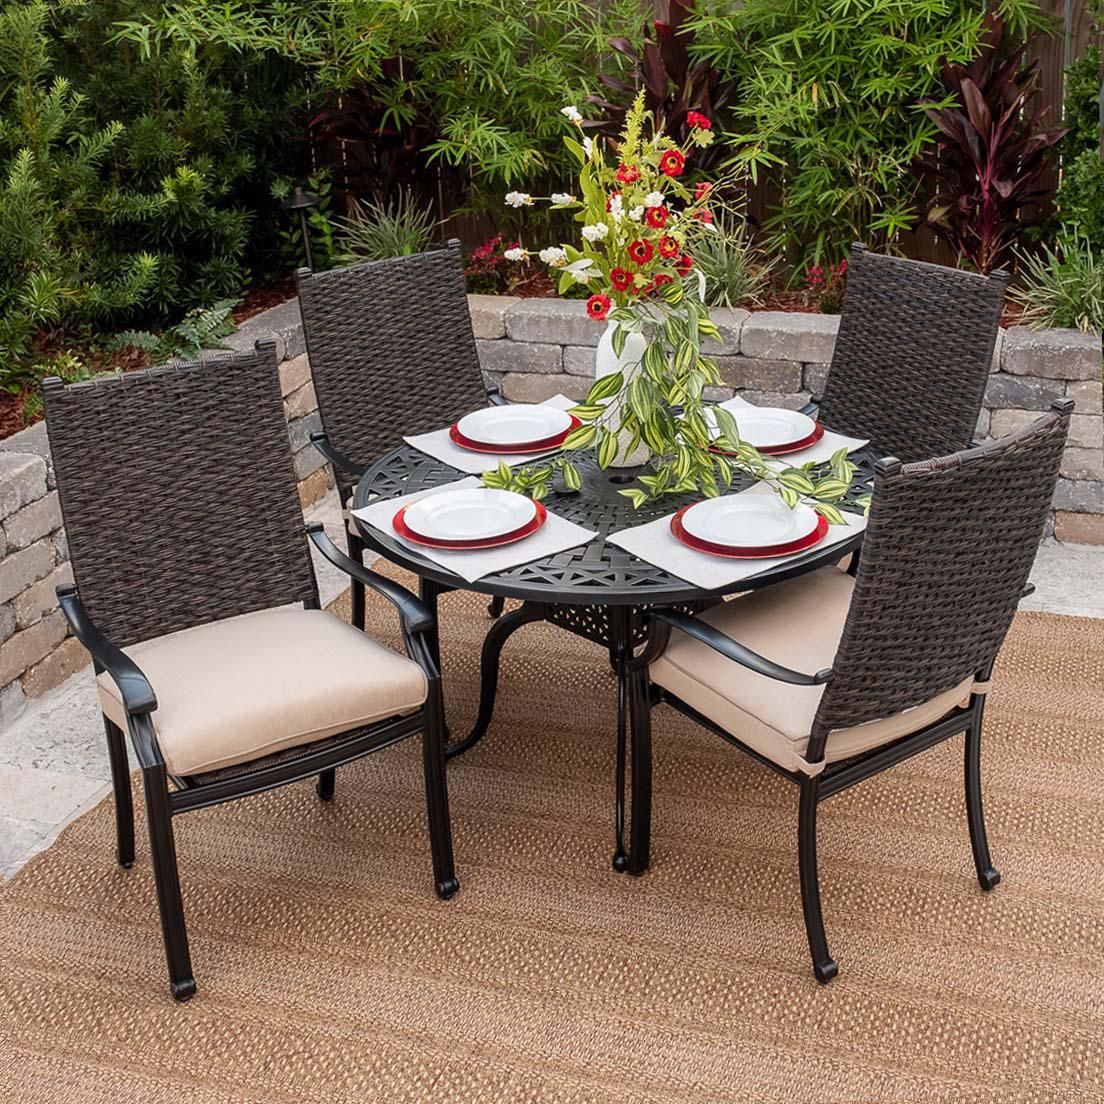 Carondelet 5 Piece Wicker Patio Dining Set W/ 48 Inch Round Patio Throughout Wicker 5 Piece Round Patio Dining Sets (View 4 of 15)